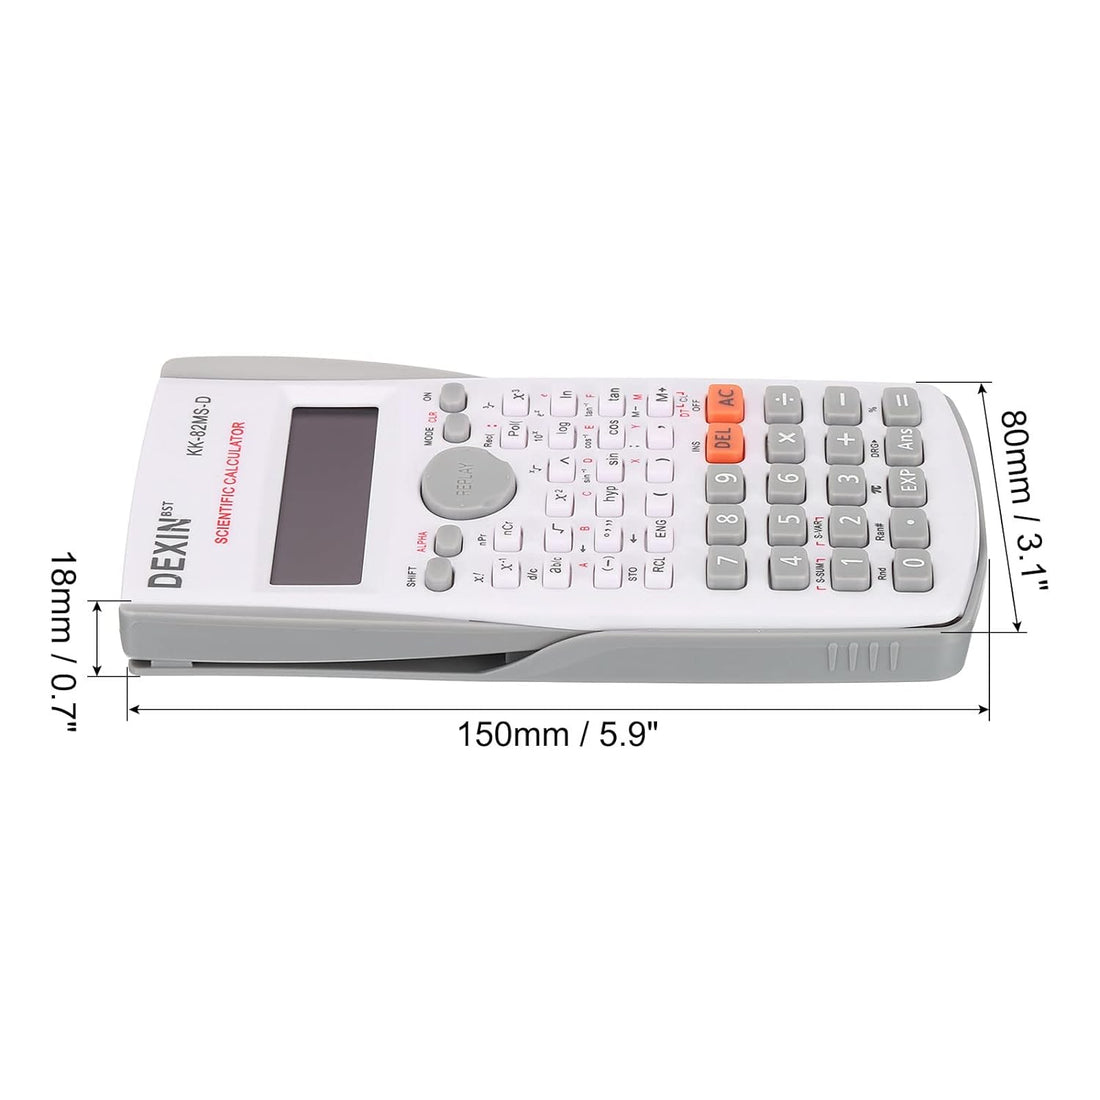 PATIKIL Scientific Calculator, 2-Line Standard Engineering Calculator with 240 Function 12 Digit LCD Display Math Calculator for Office Business, Grey